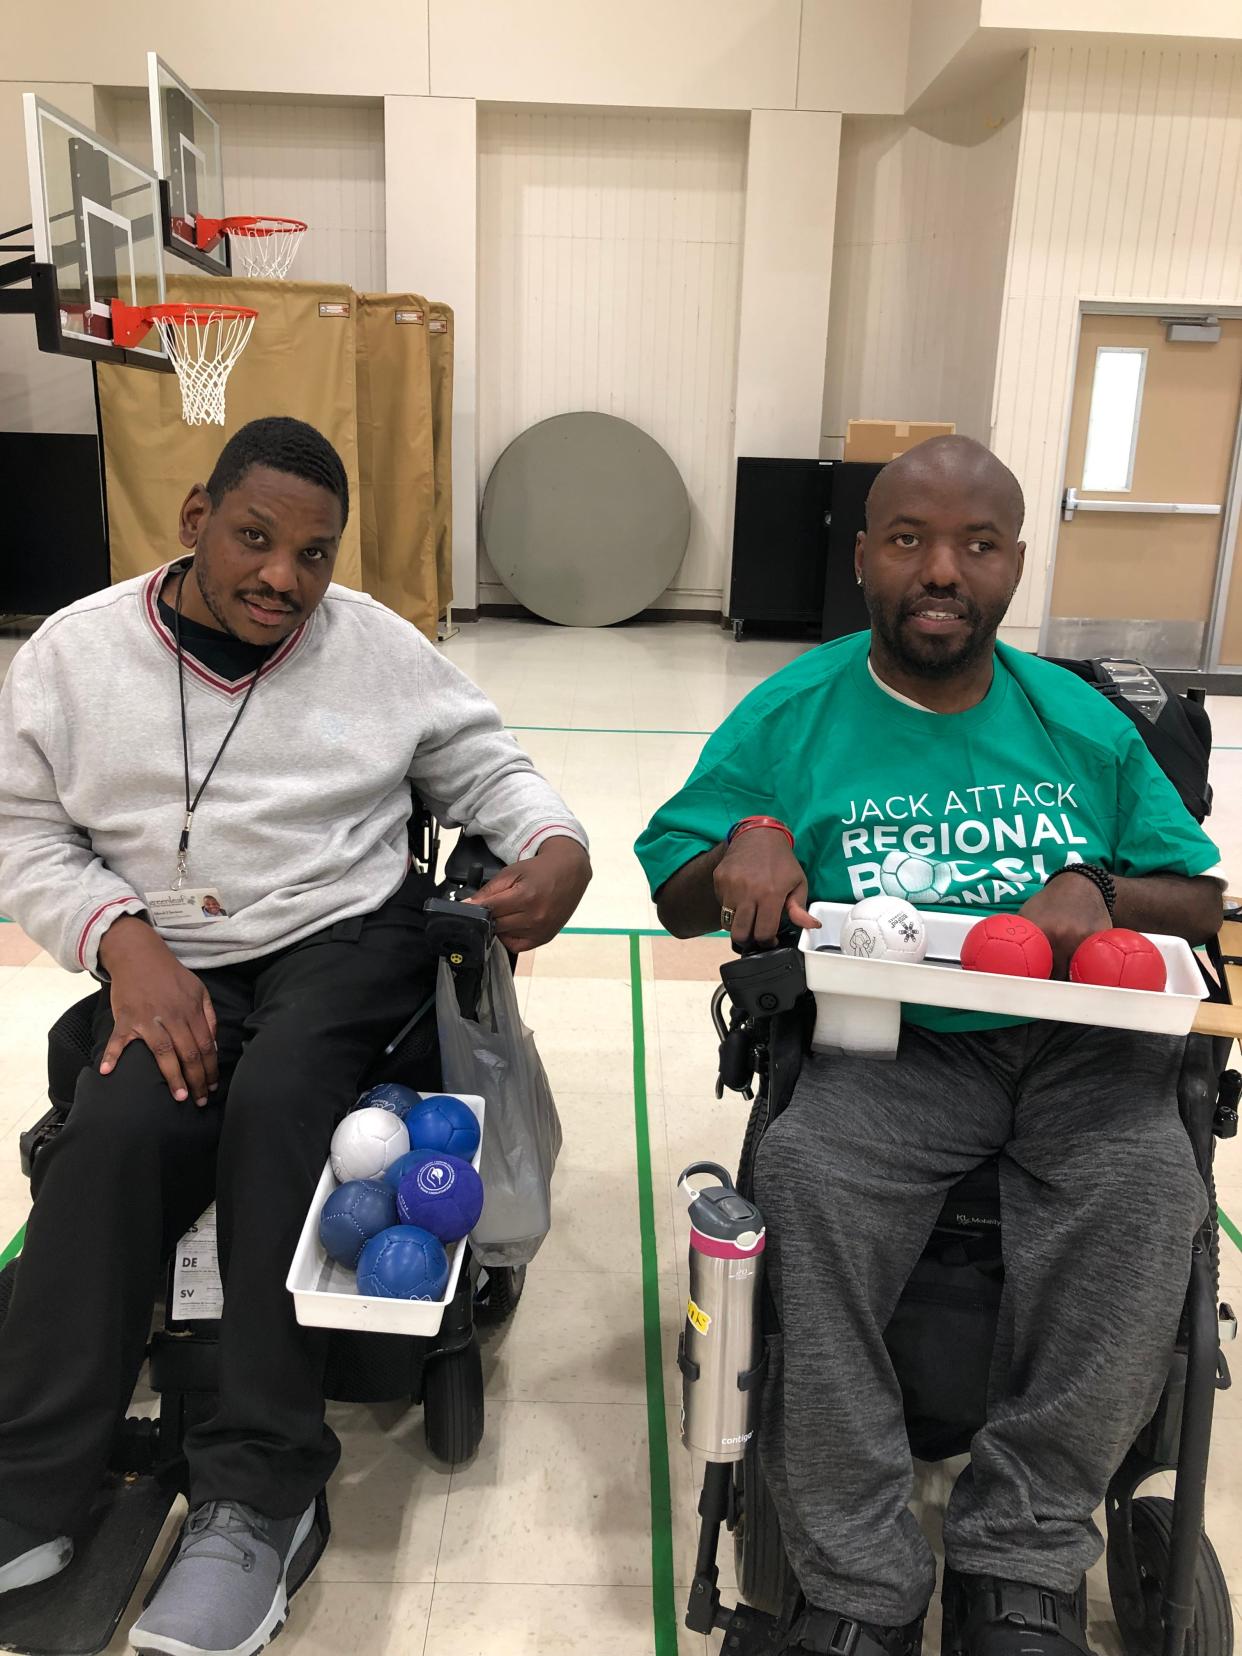 Marck Harrison, left, and Cornelius Oatis are raising funds to compete in the USA Boccia National Championships in August in Cedar Falls, Iowa. Their ultimate goal is the Paralympics in Los Angeles in 2028.